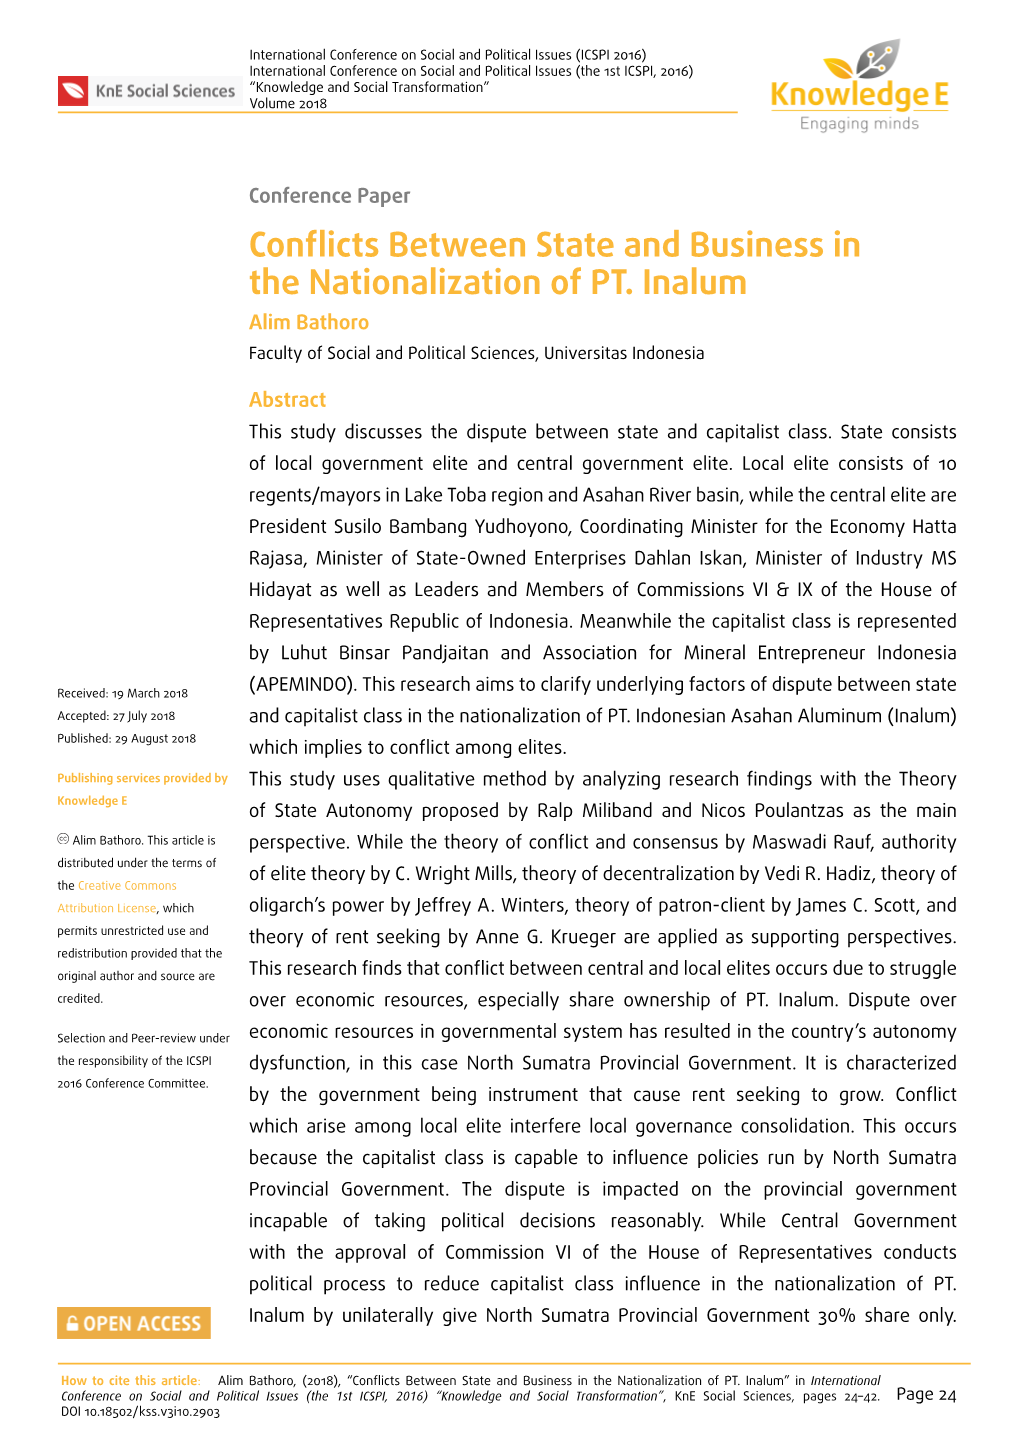 Conflicts Between State and Business in the Nationalization of PT. Inalum